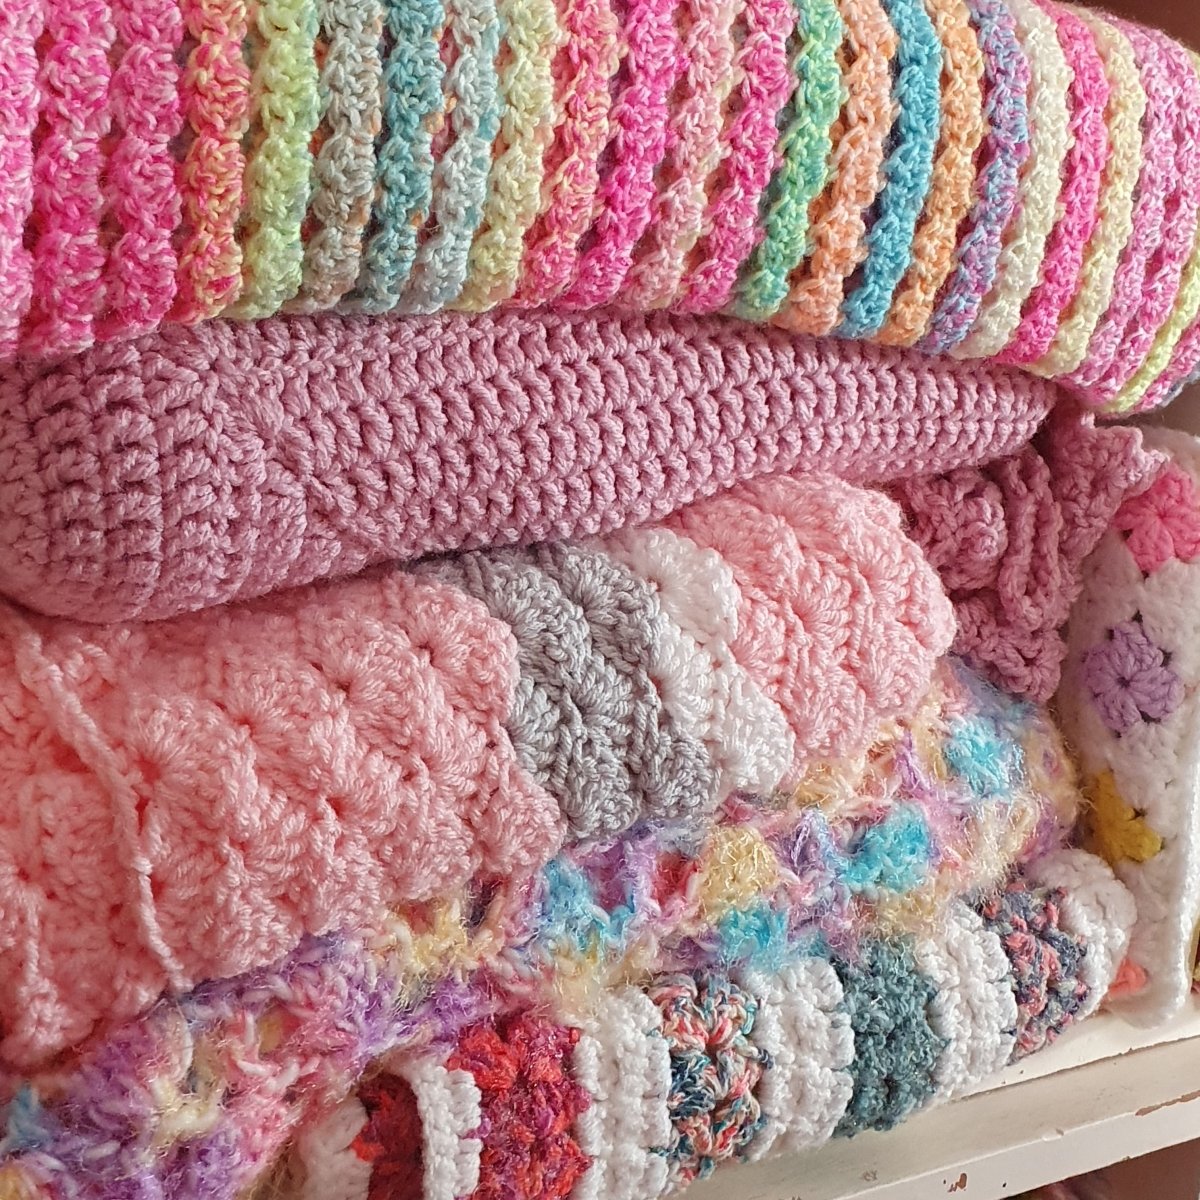 5 Easy and Quick Written Crochet Blanket Patterns for Beginners - with Video Tutorials - The Secret Yarnery